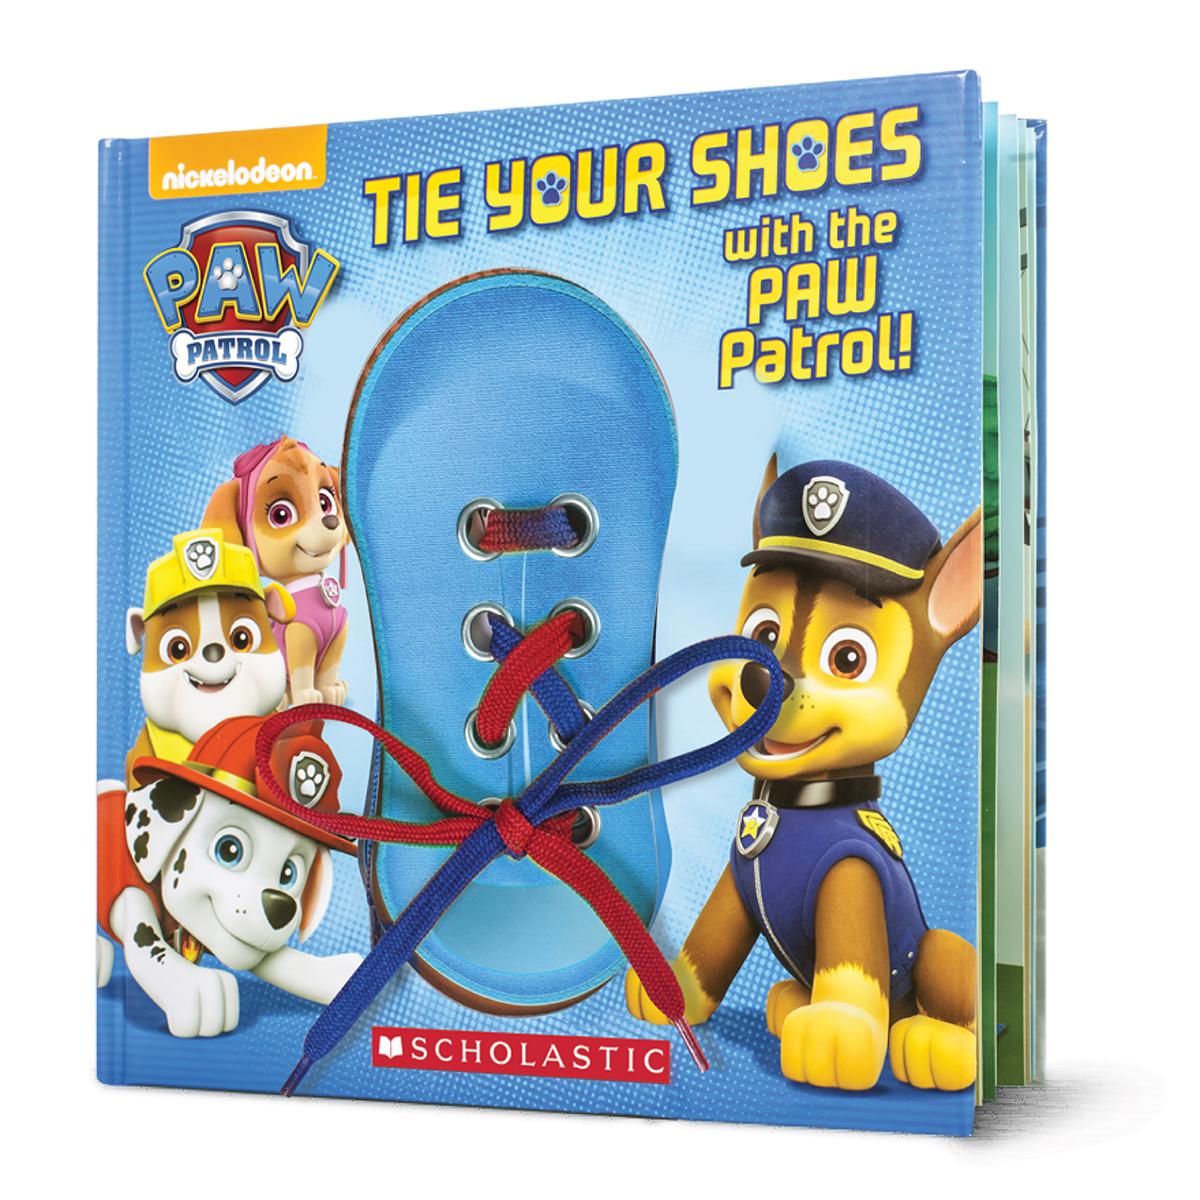  Tie Your Shoes with the PAW Patrol! 